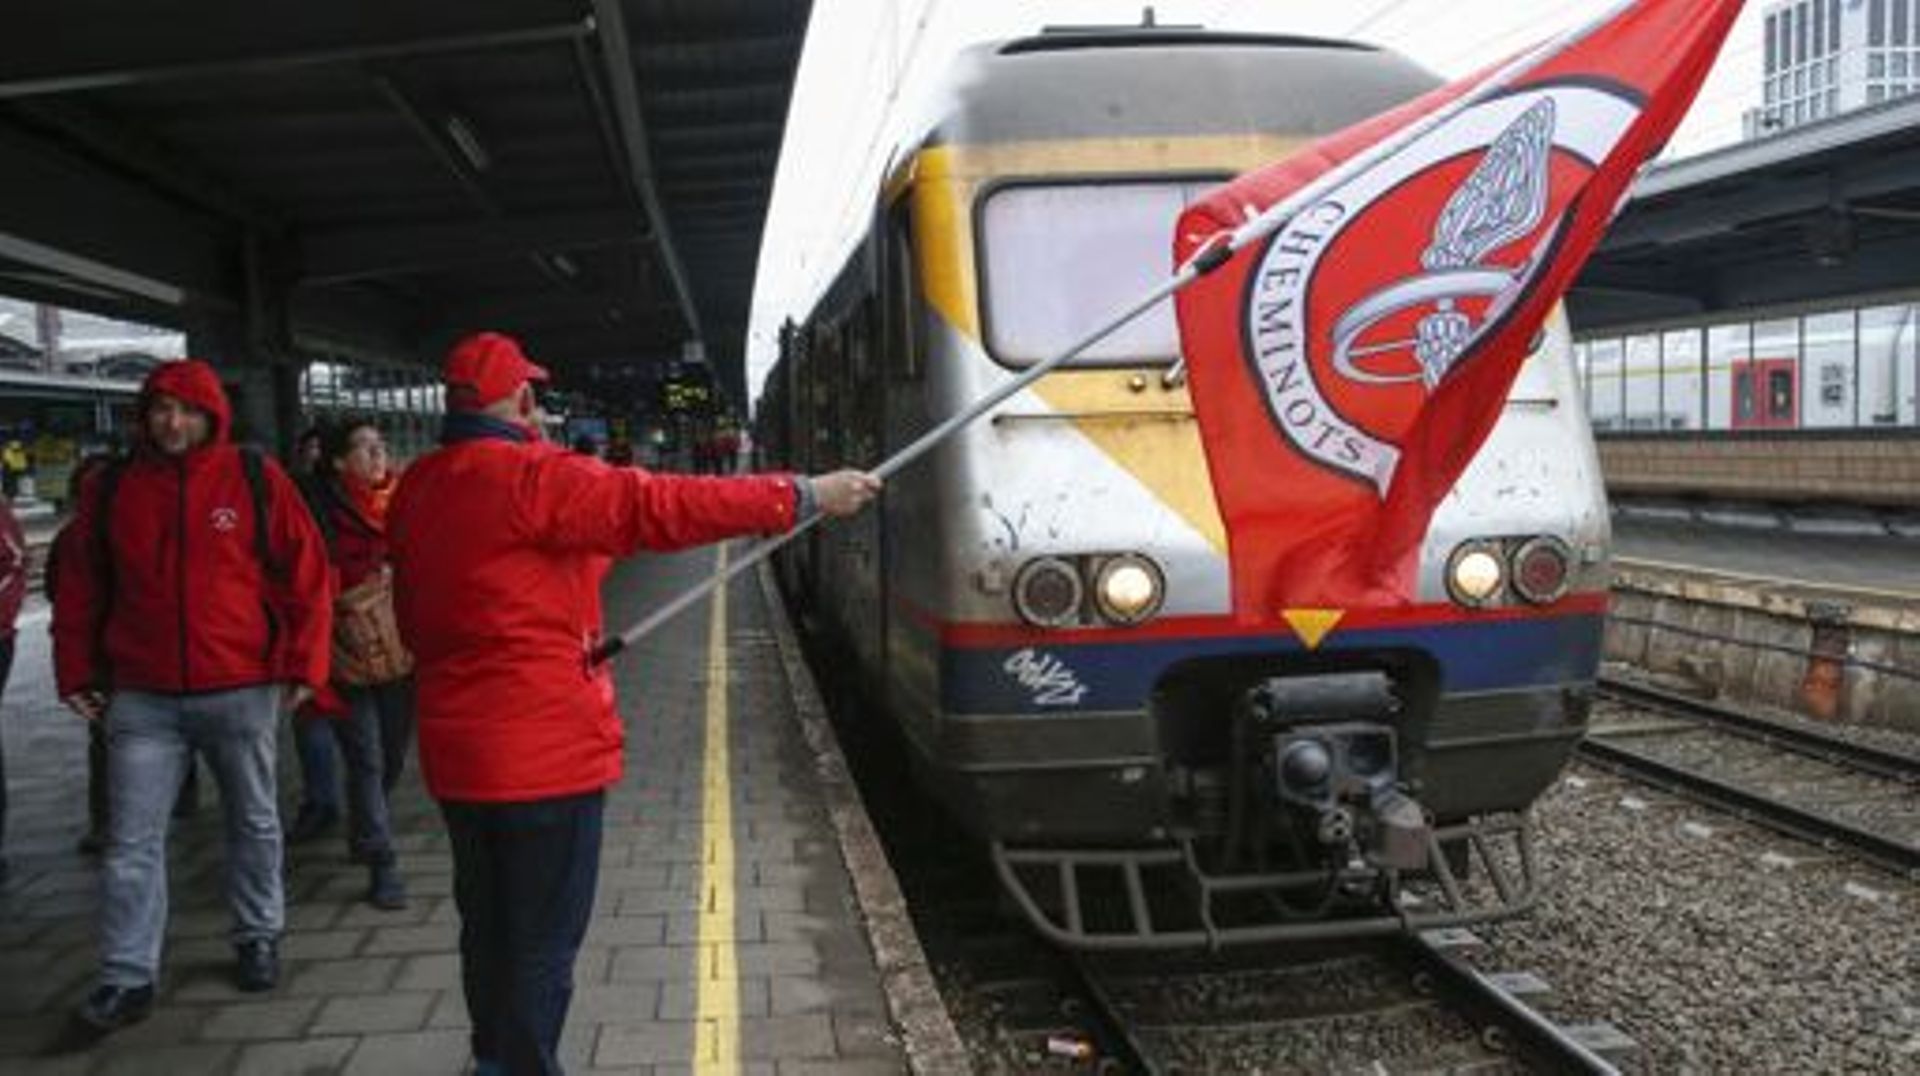 20160106 - BRUSSELS, BELGIUM: Union members take part in a 48-hour strike of CGSP Cheminots and CSC Transcom, Francophone unions of Belgian railway company NMBS-SNCB, Wednesday 06 January 2016 in Brussels. Flemish unions decided to suspend the strike in o